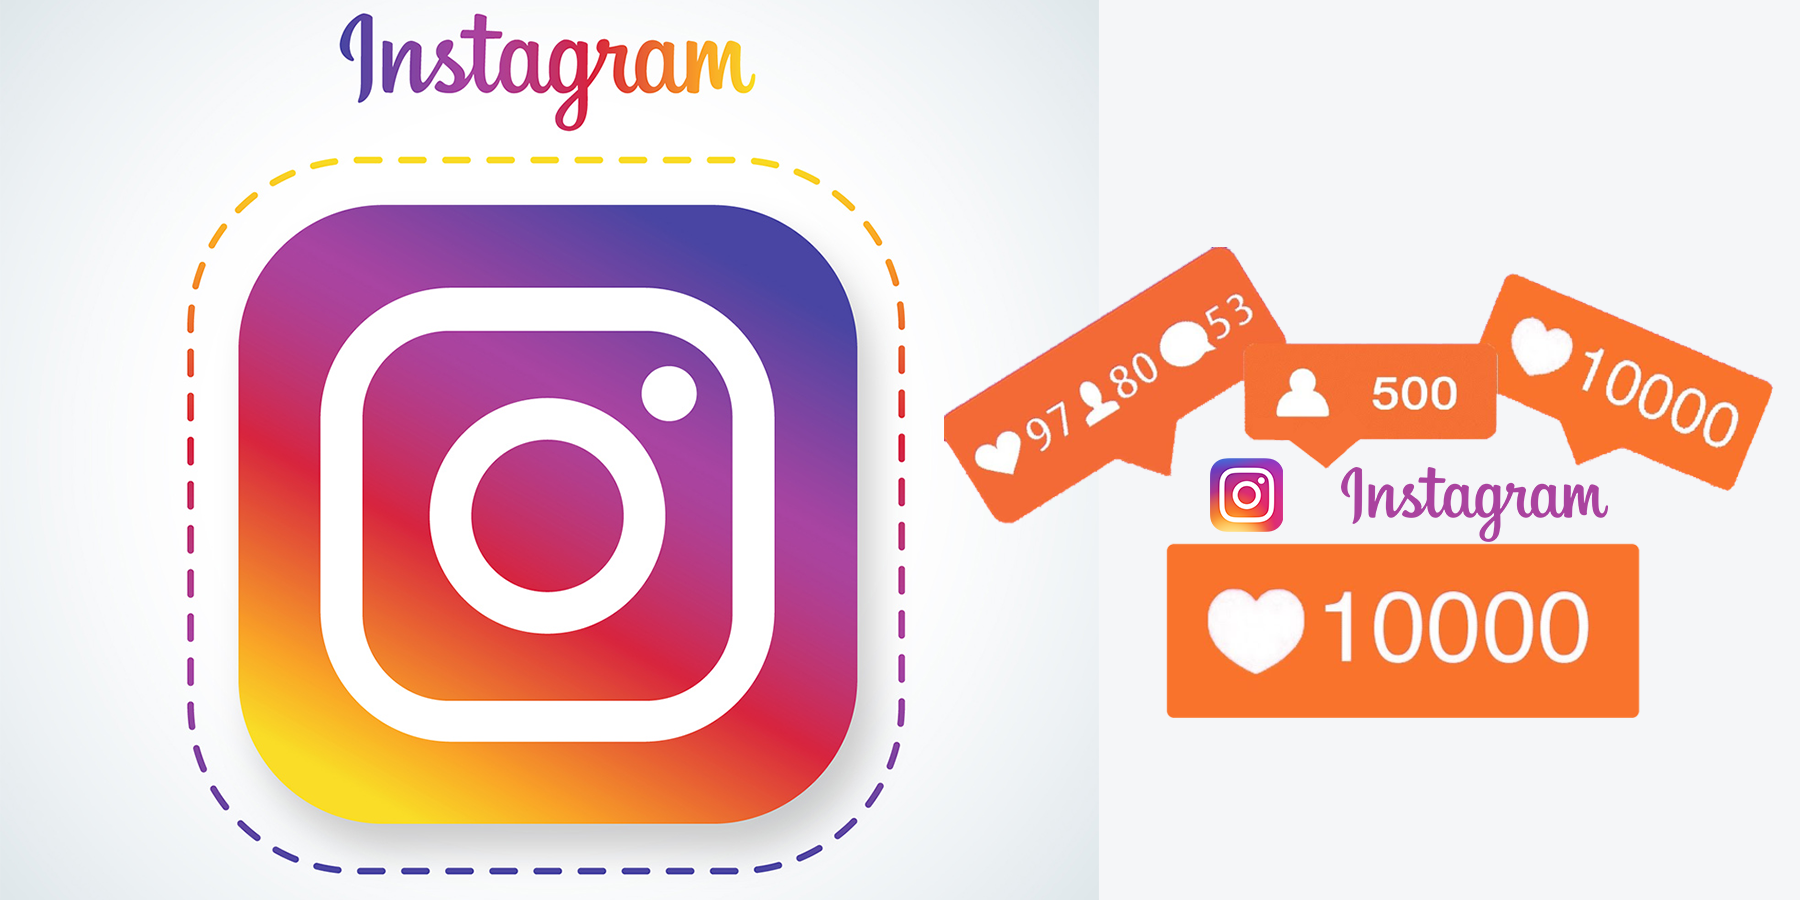 Why should youbuy Instagram likes for that enterprise?